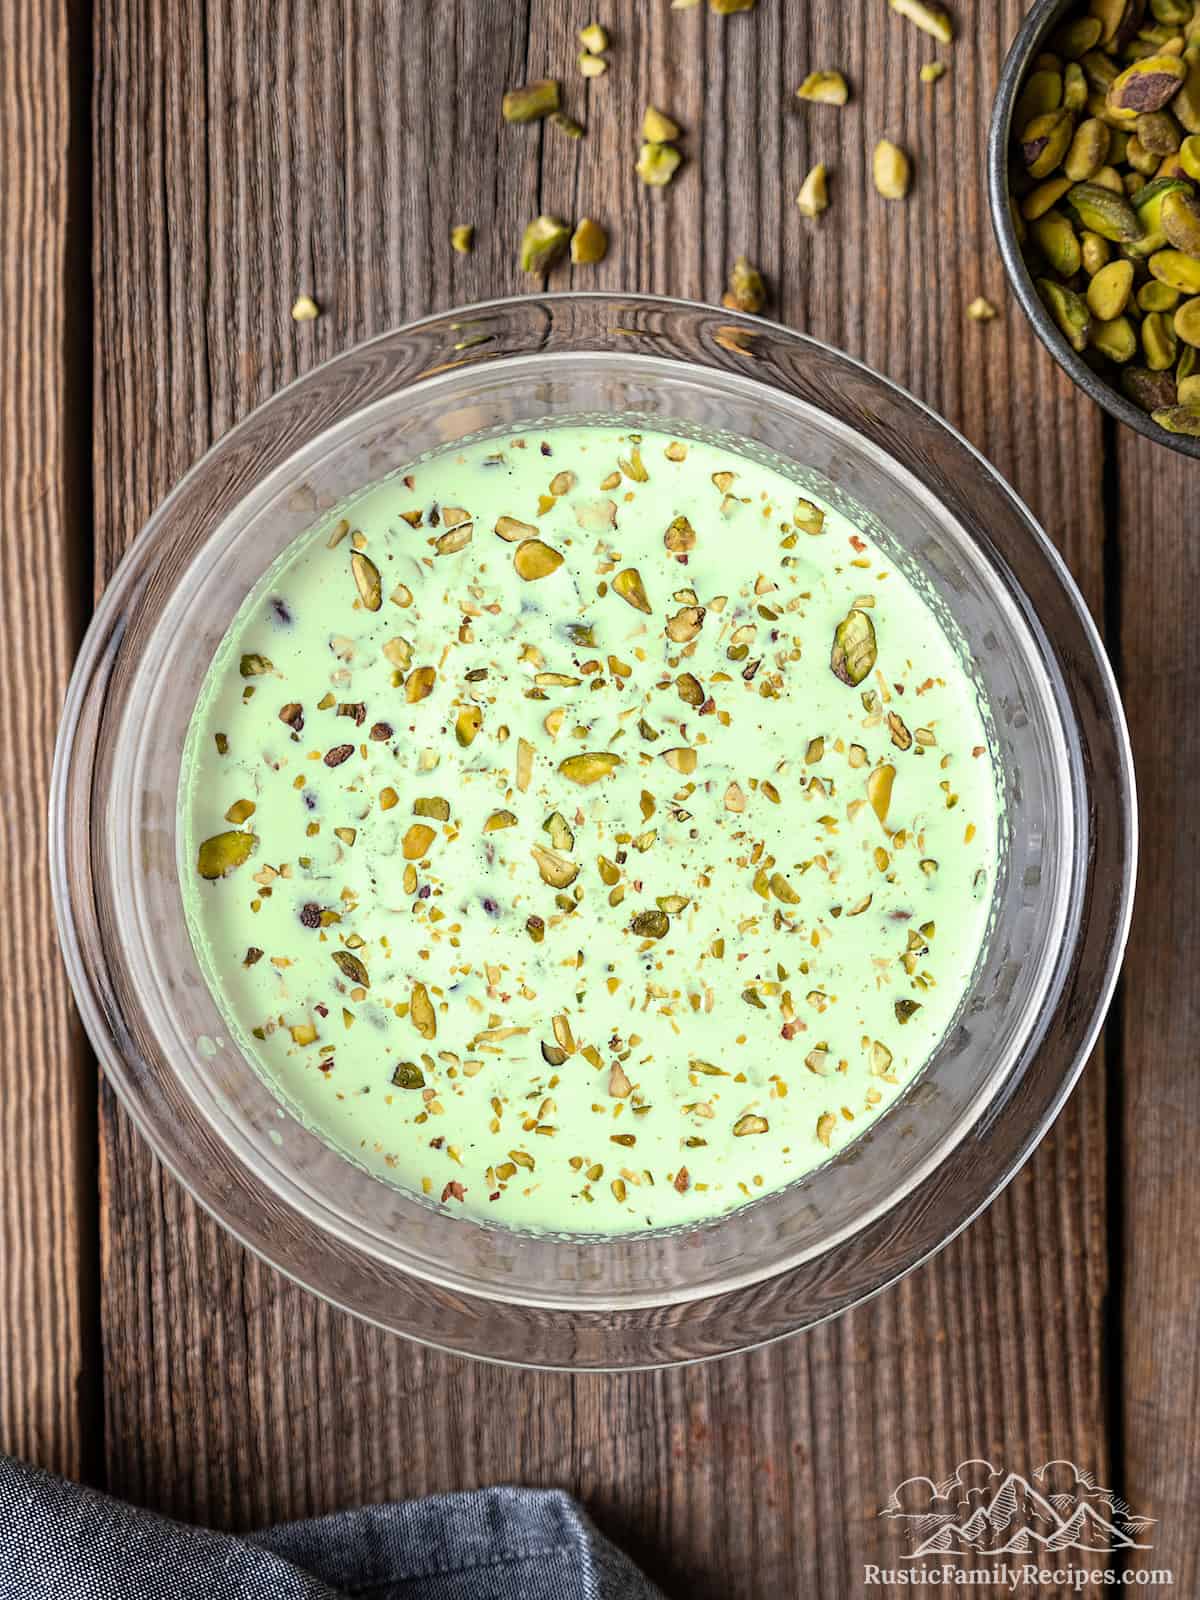 Top view of a bowl of pistachio ice cream mixture.